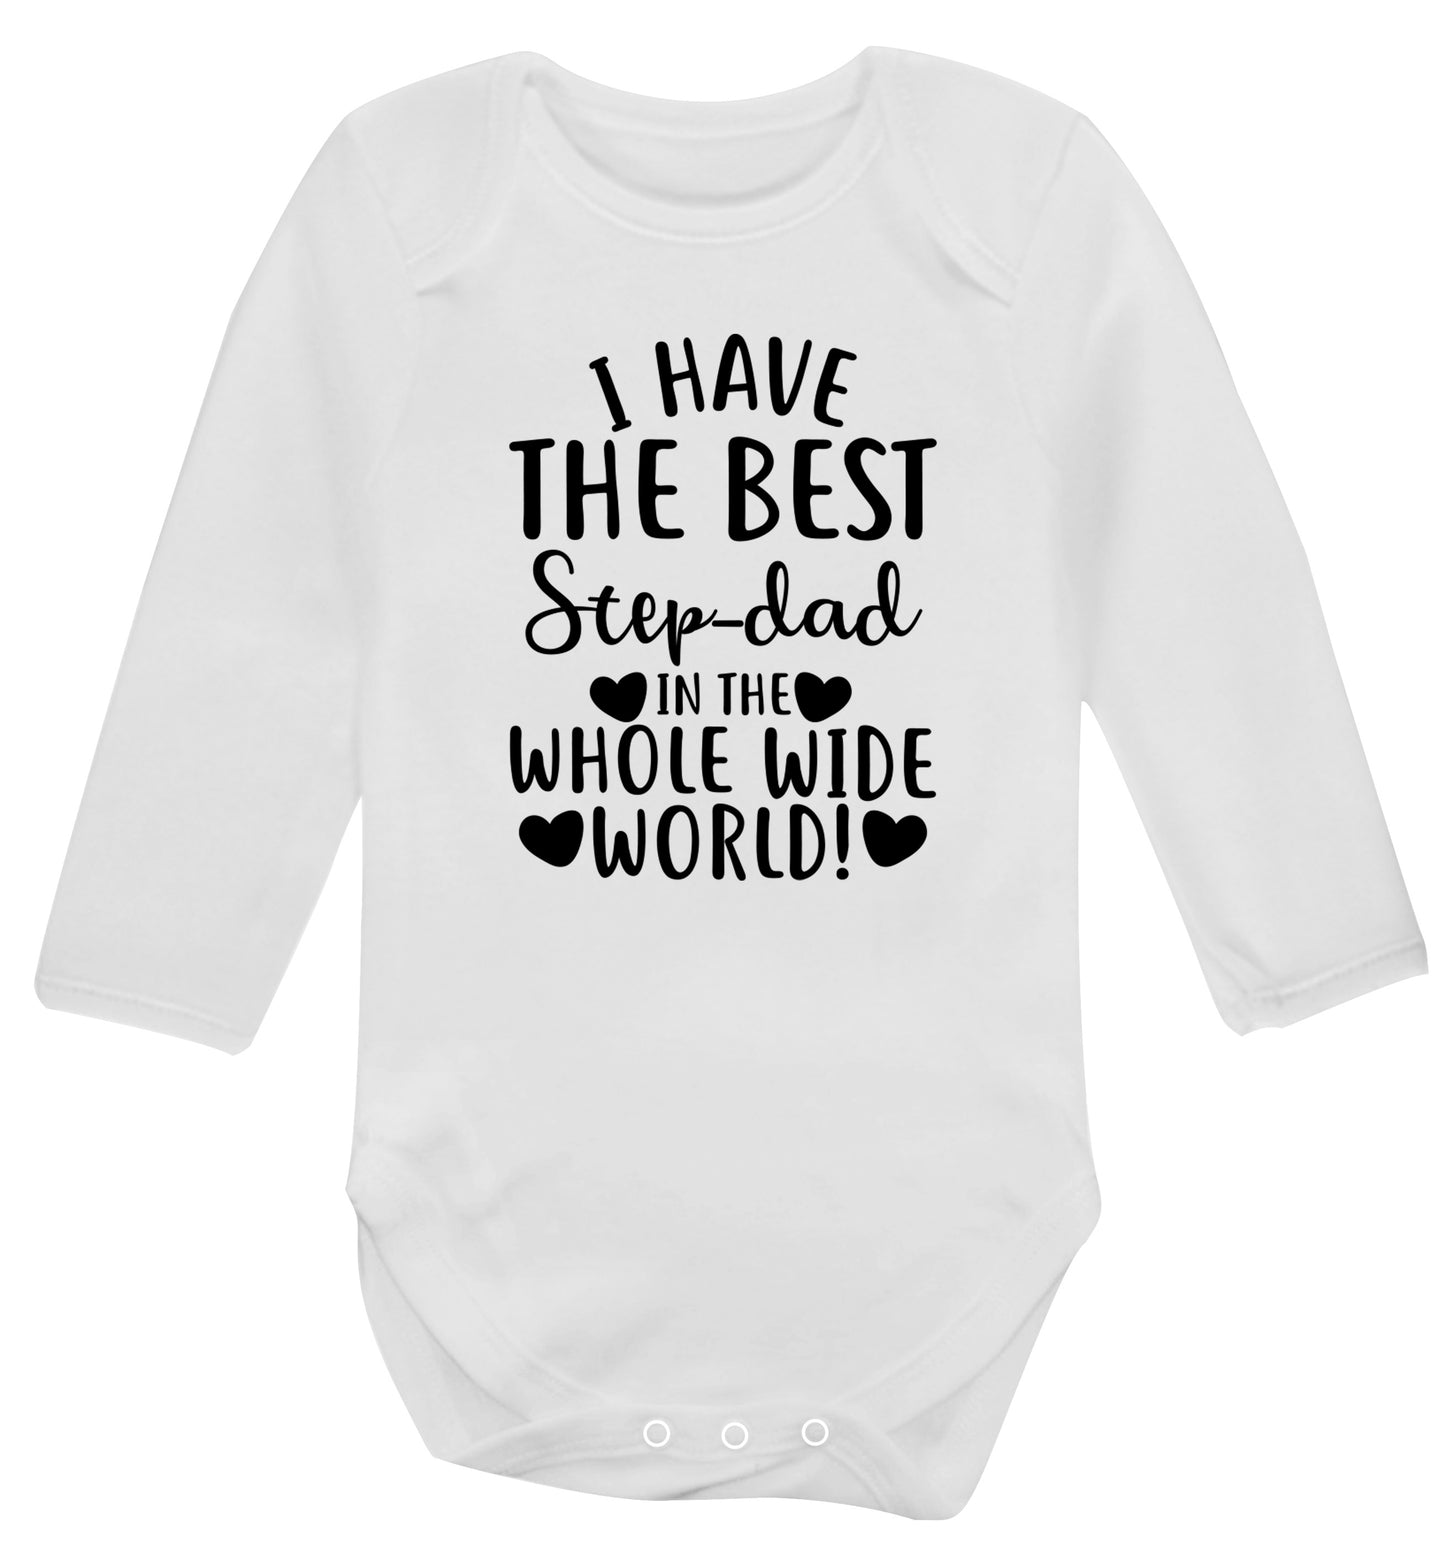 I have the best step-dad in the whole wide world! Baby Vest long sleeved white 6-12 months